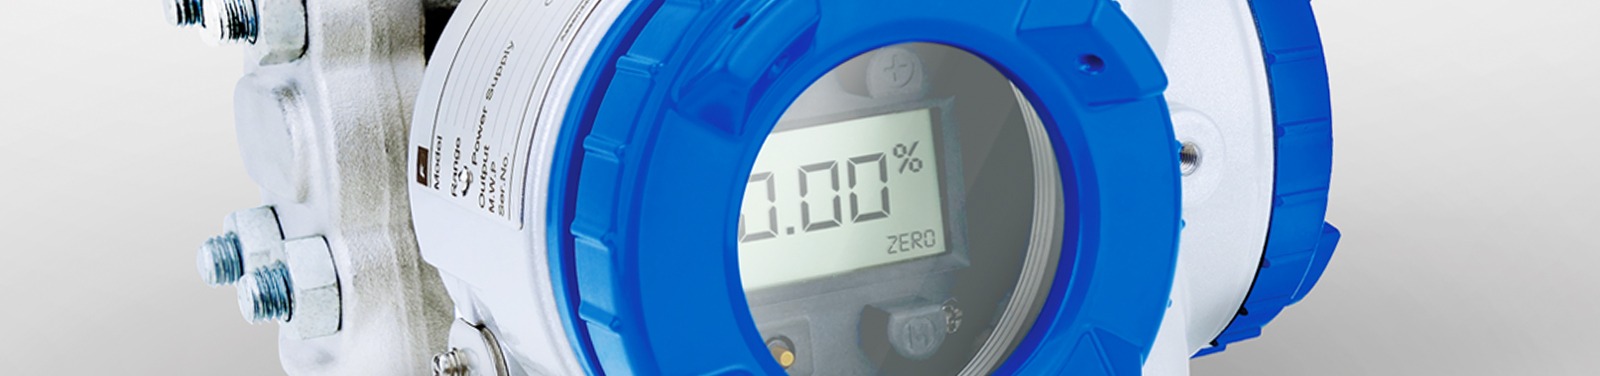 pressure transmitters can be equipped with a digital indicator 